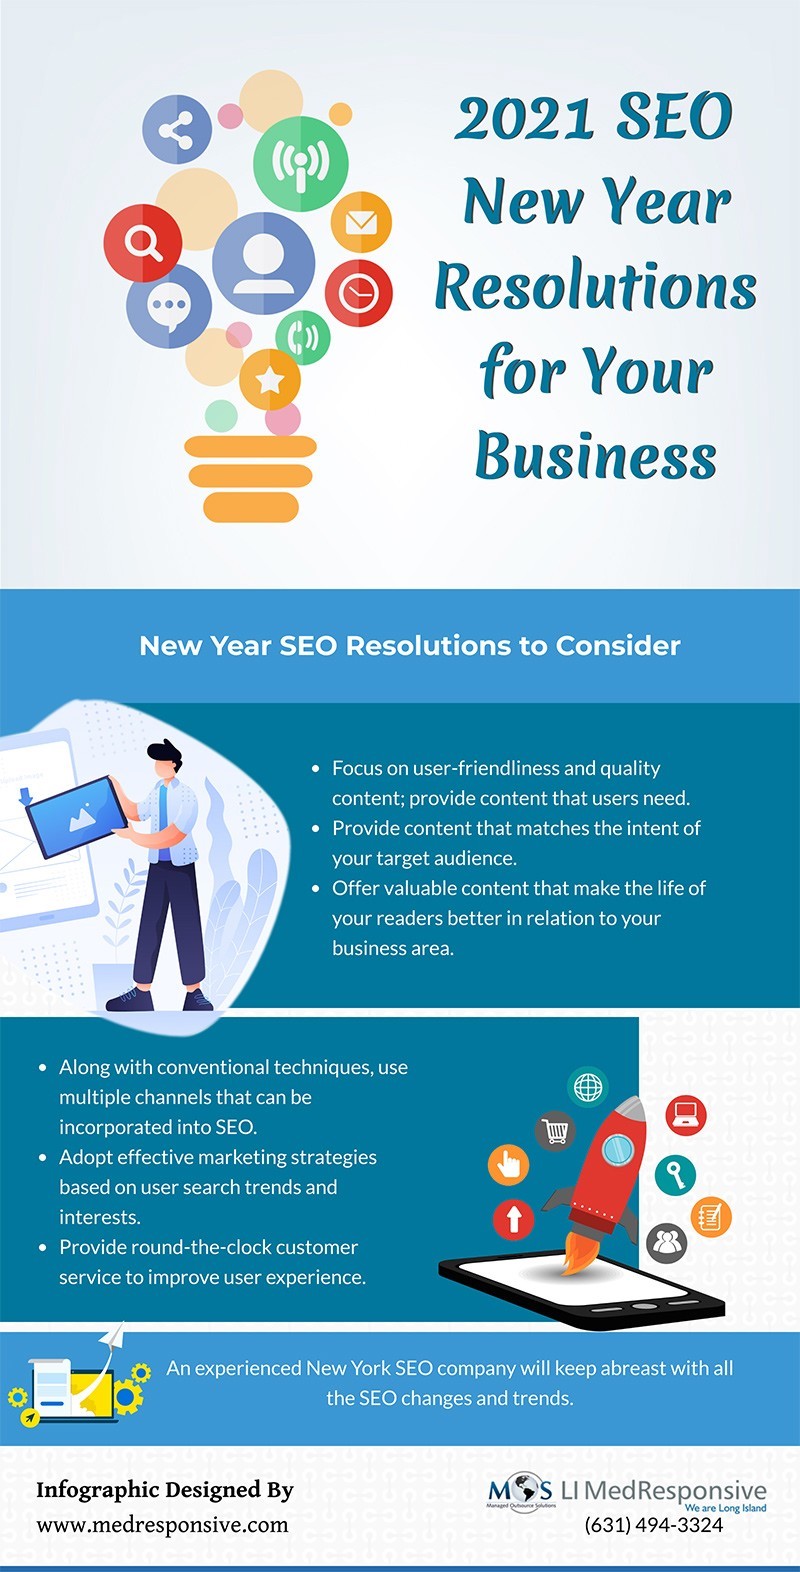 2021 SEO New Year Resolutions for Your Business [Infographic]